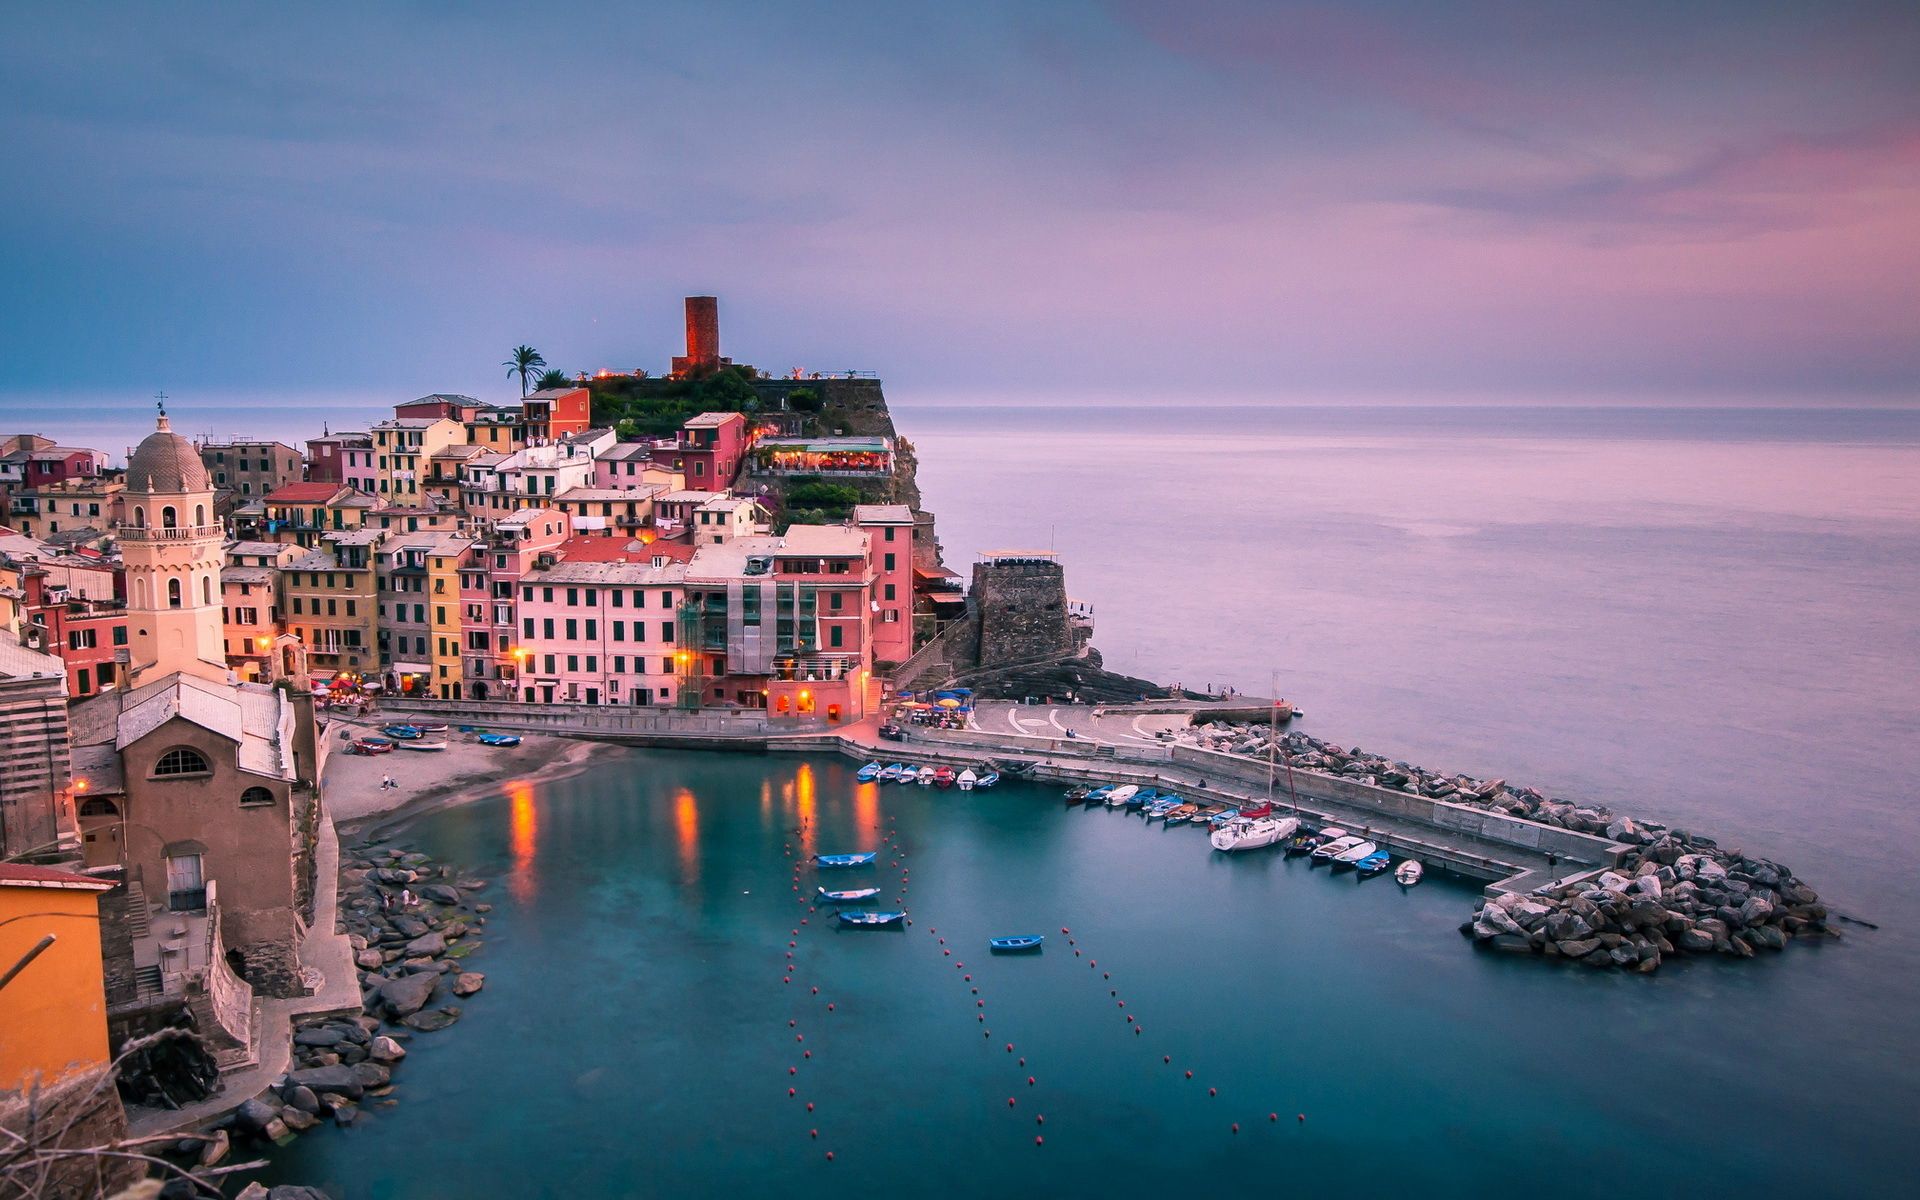 man made, vernazza, boat, building, harbor, house, ocean, towns